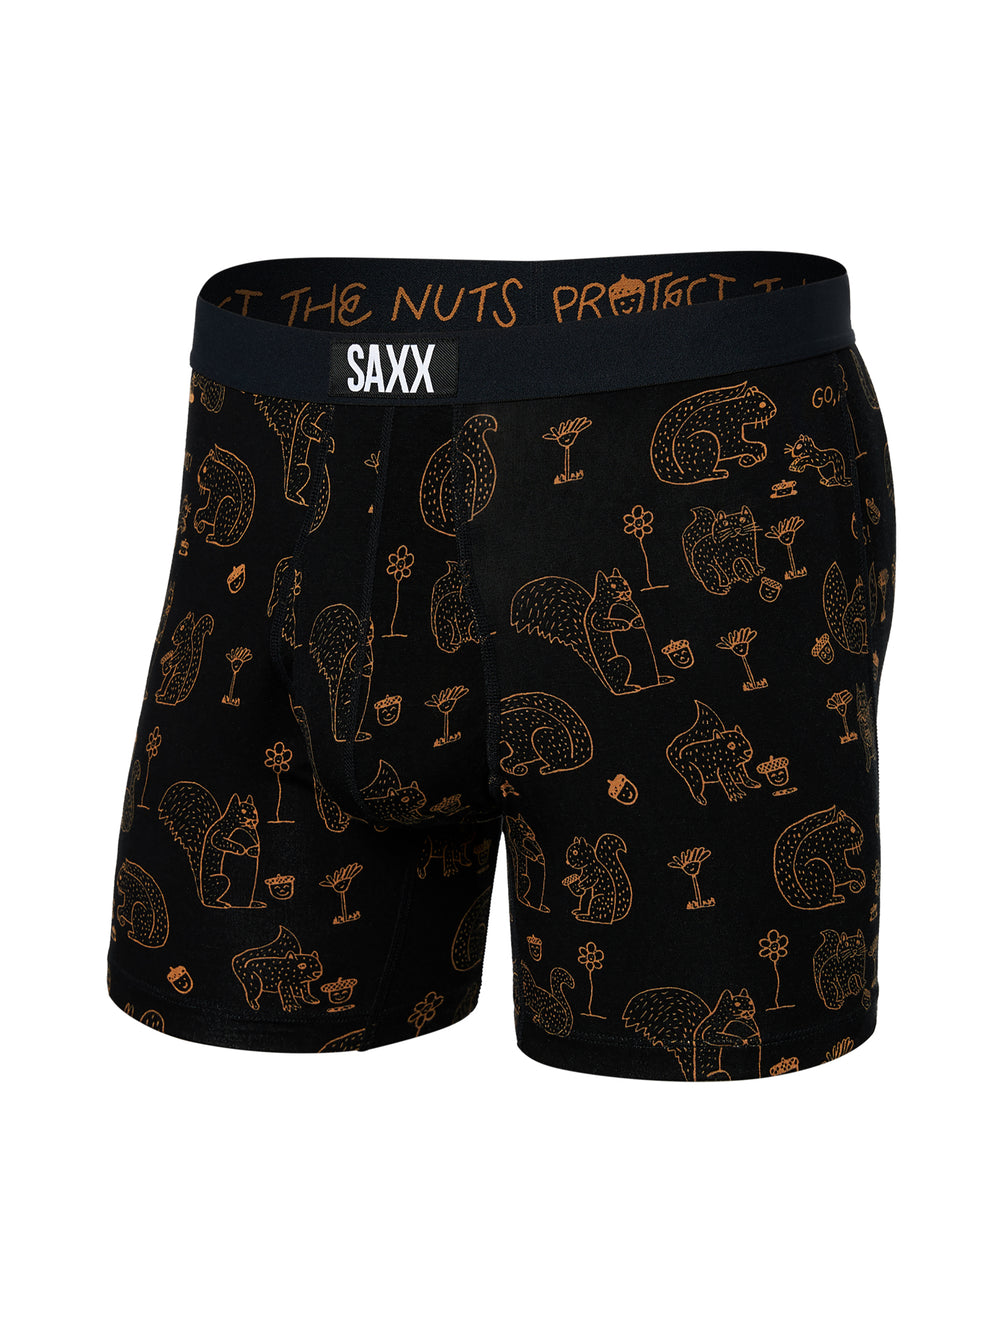 SAXX ULTRA BOXER BRIEF - PROTECT THE NUTS